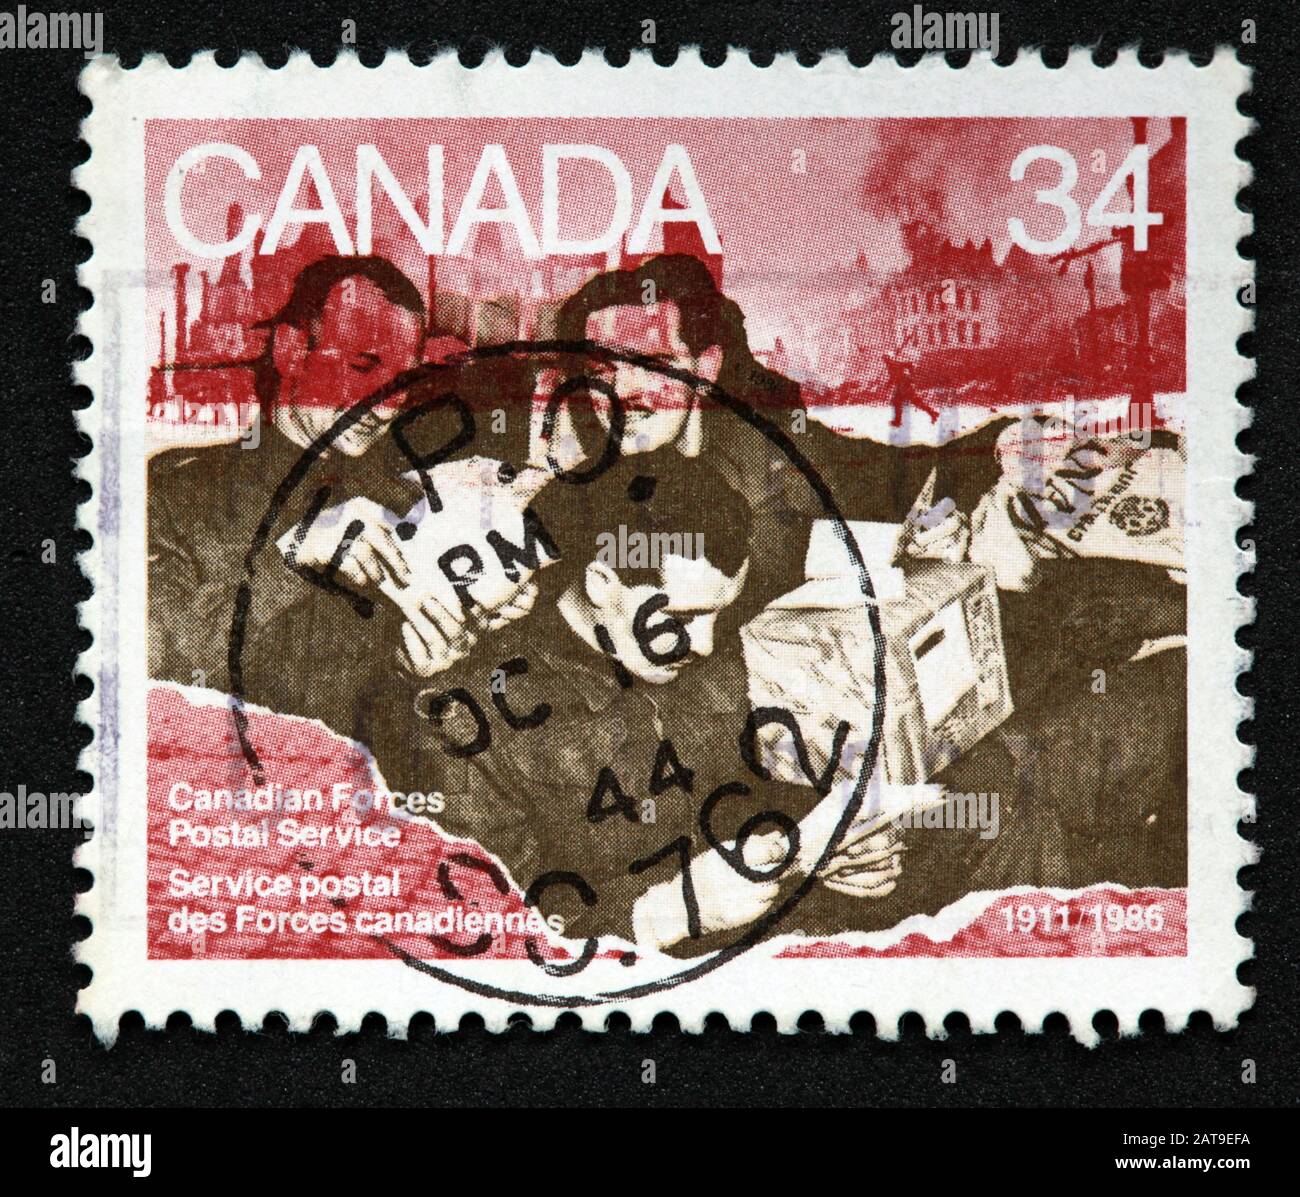 Canadian Stamp, Canada Stamp, Canada Post,used stamp, Stamp 34c, Canadian Forces Postal service, Service Postal des forces canadiennas Stock Photo